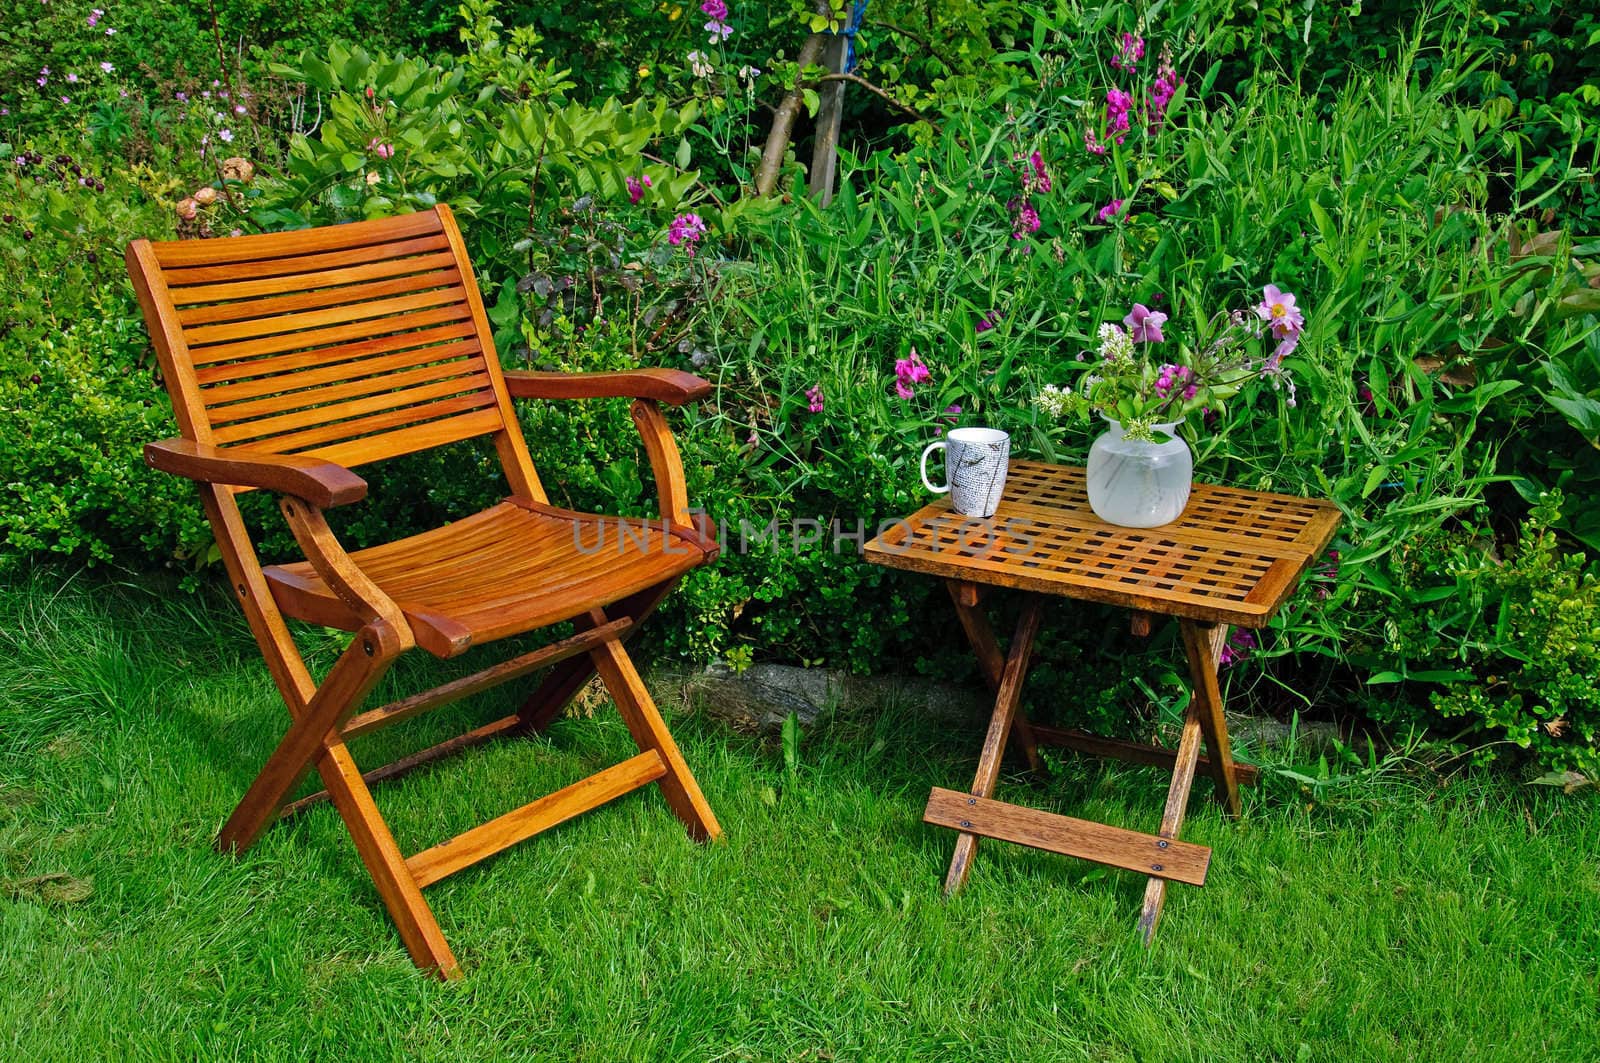 A hardwood garden chair and table, cup of coffe and a vase with flowers.